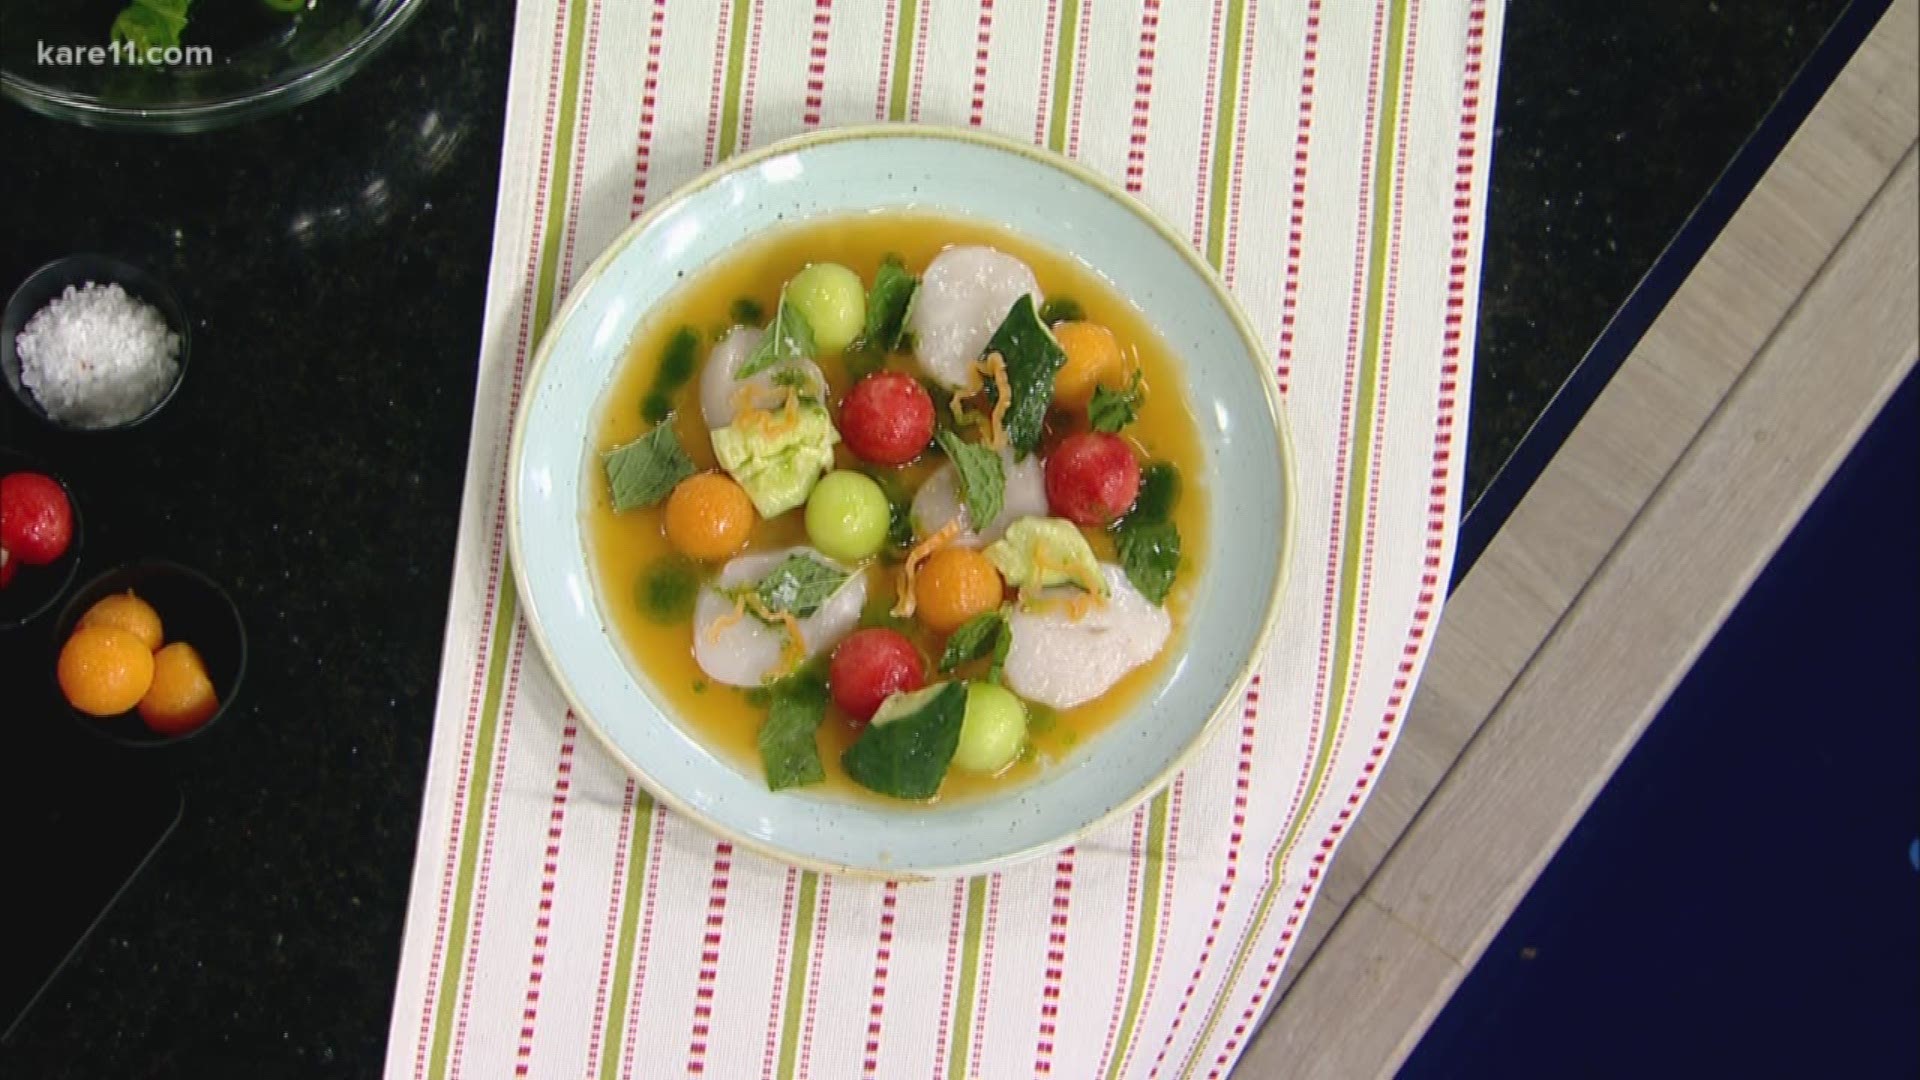 Pajarito Chef/Co-Owner Tyge Nelson joined us in-studio to teach us about ceviche, and its variations.